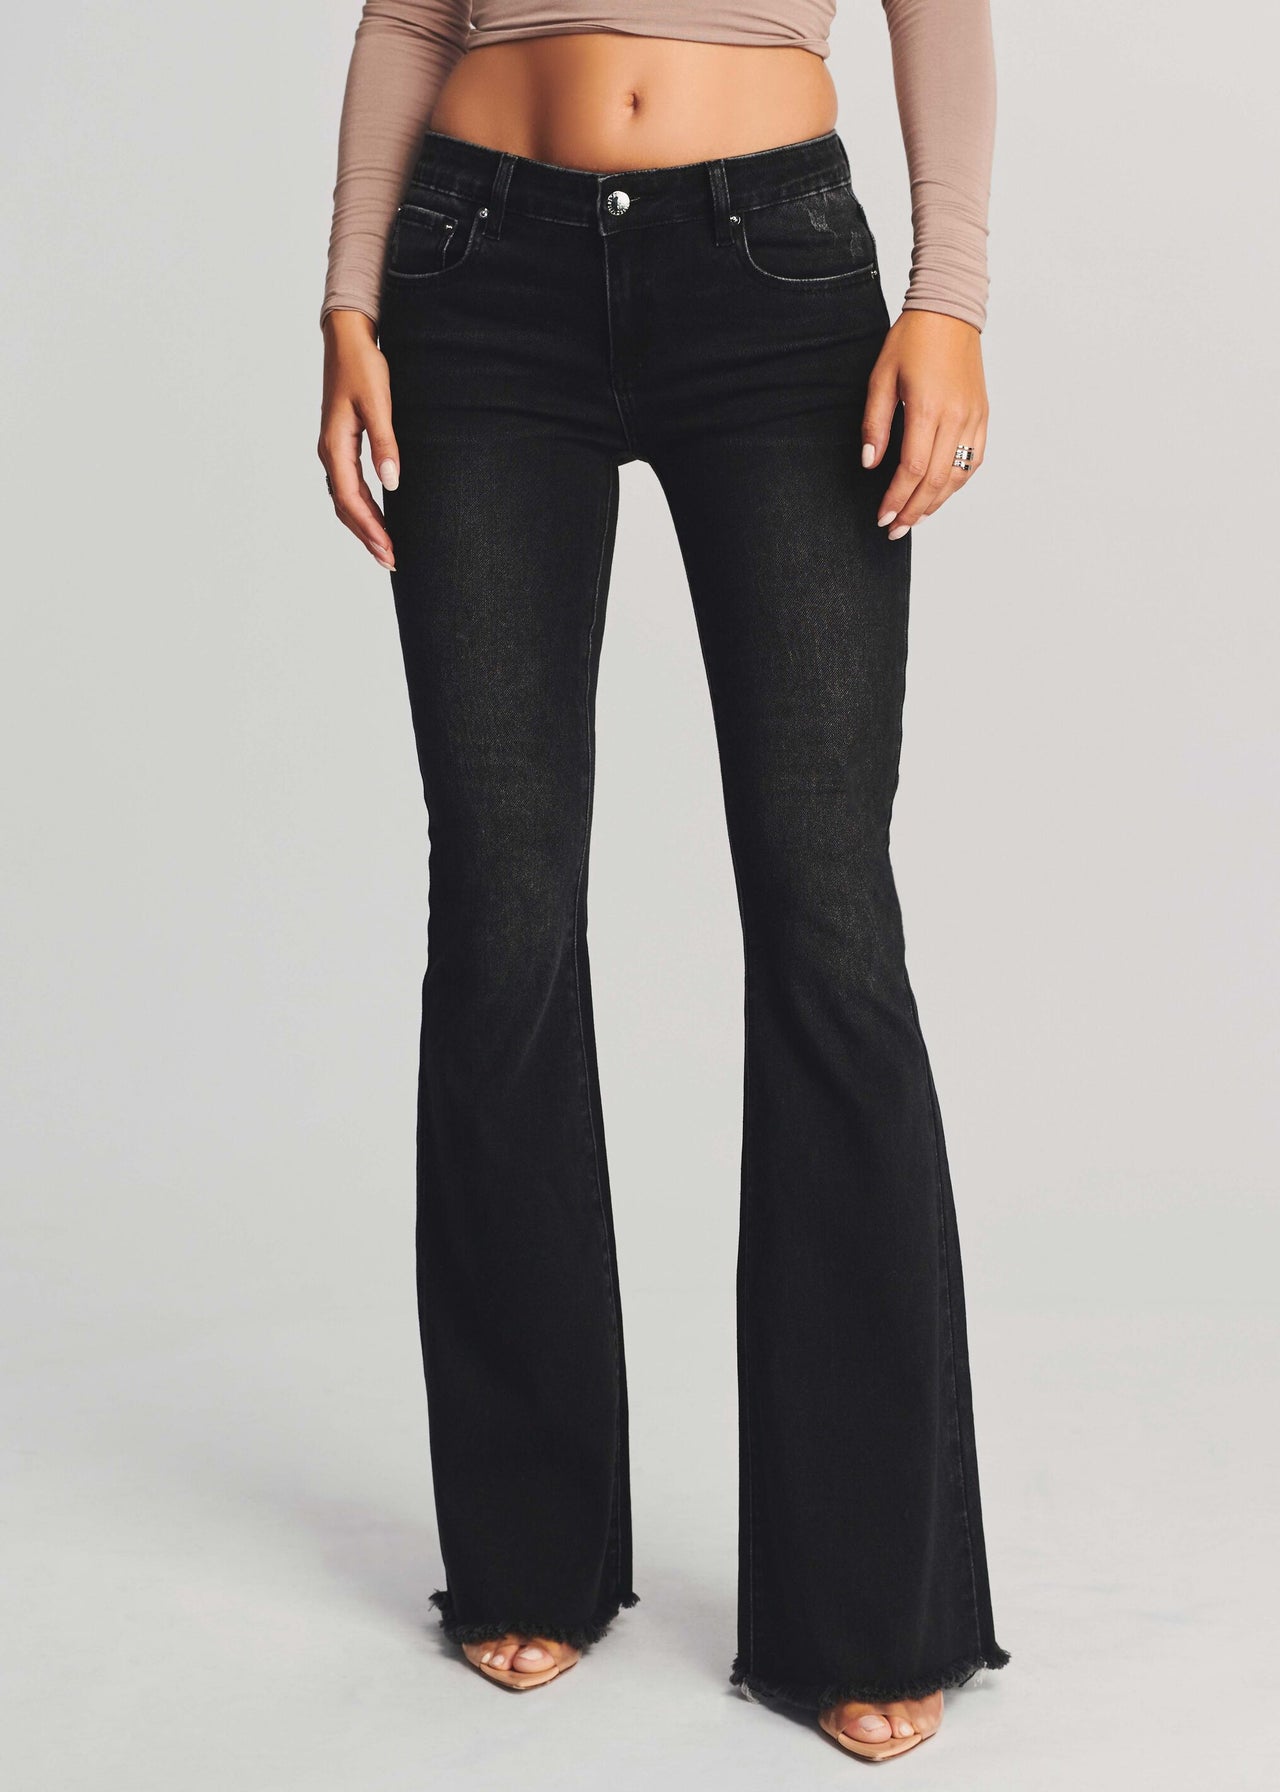 Barrymore Terry Pant